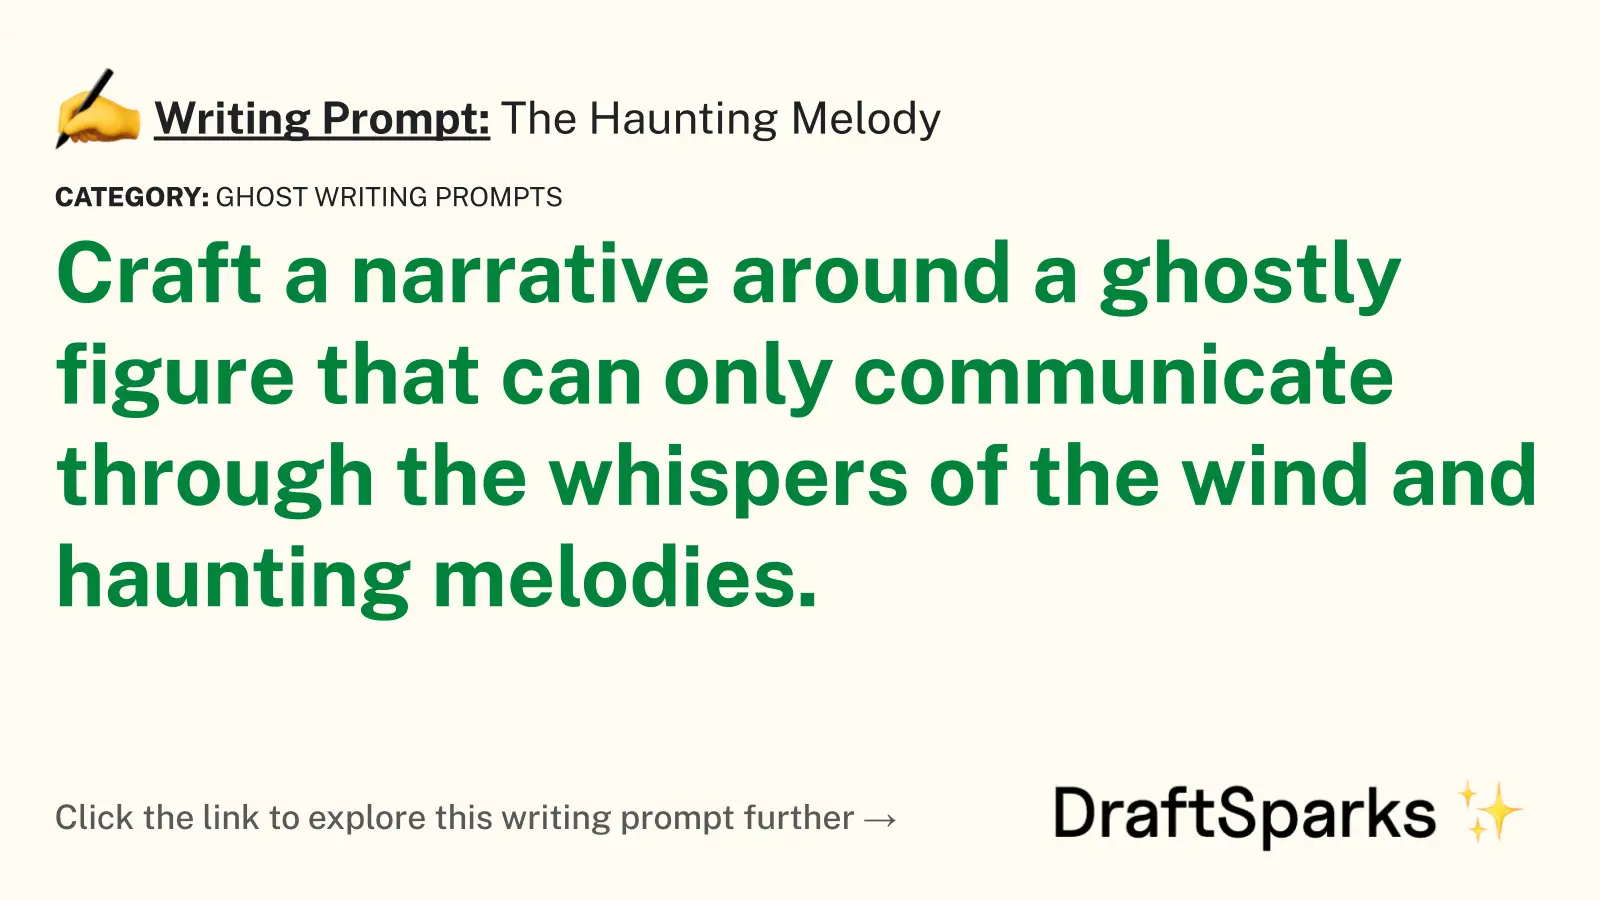 The Haunting Melody